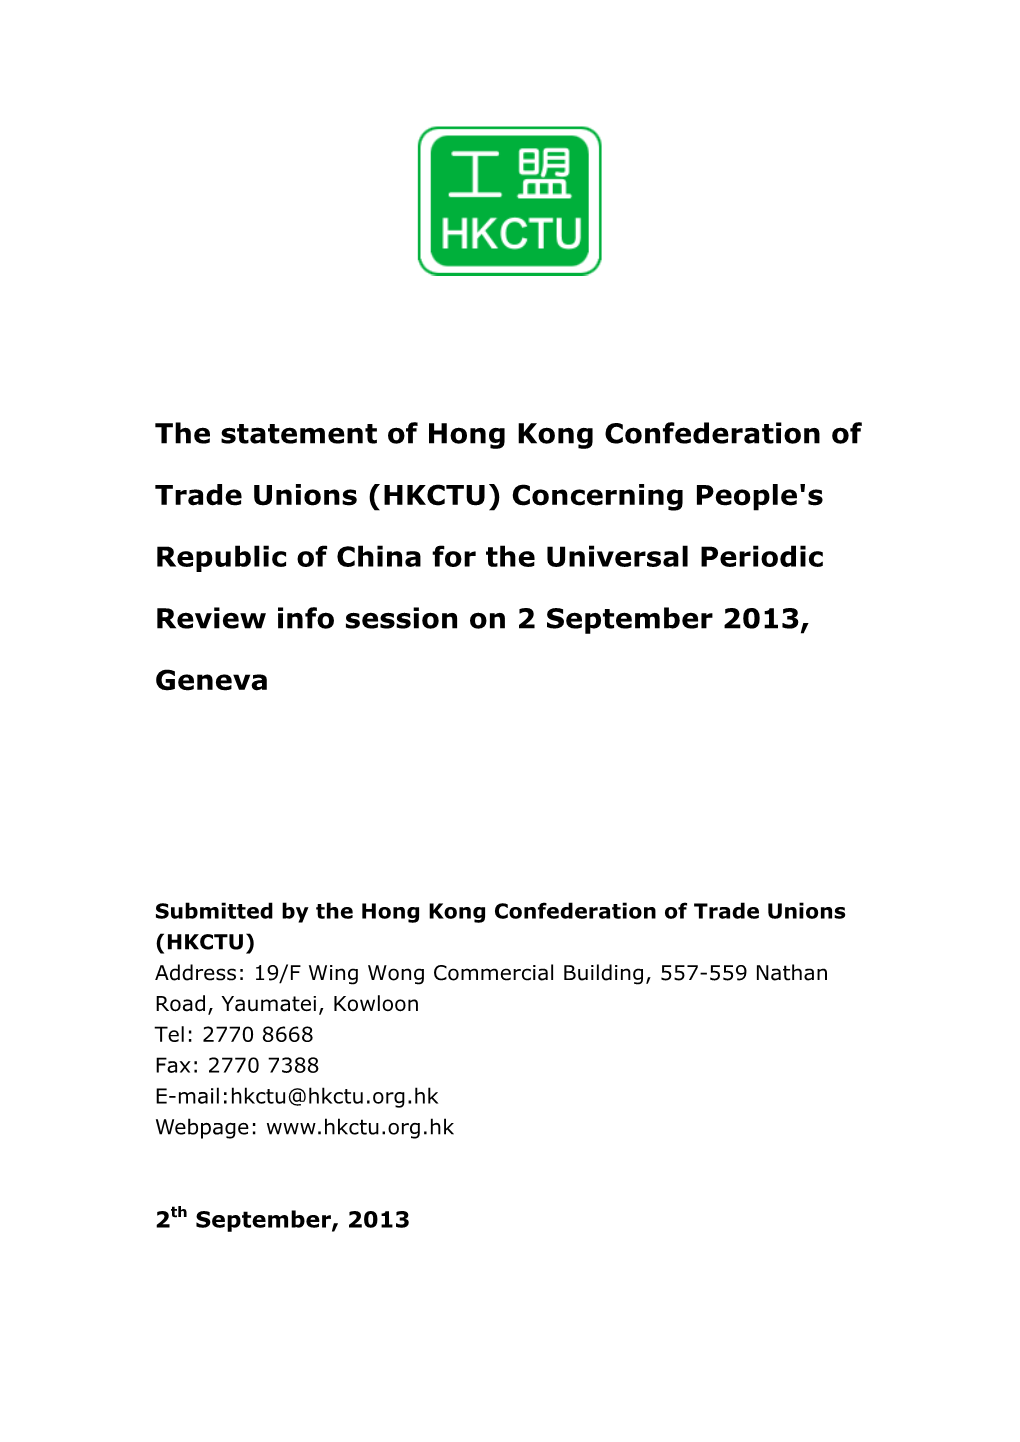 Hong Kong Confederation of Trade Unions (HKCTU) Address: 19/F Wing Wong Commercial Building, 557-559 Nathan